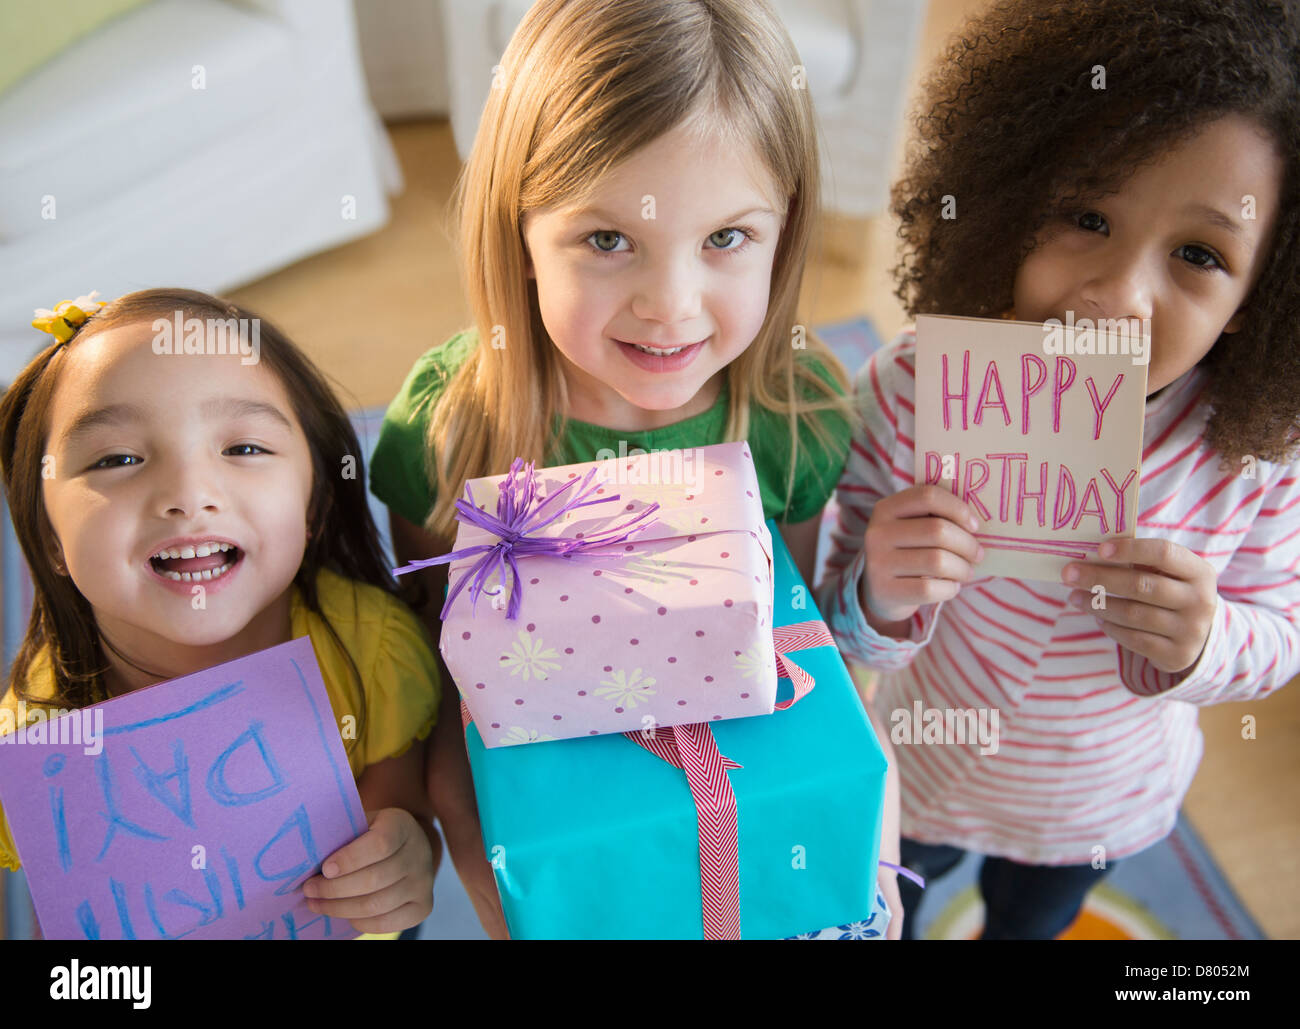 Girls holding presents et cartes at Birthday party Banque D'Images